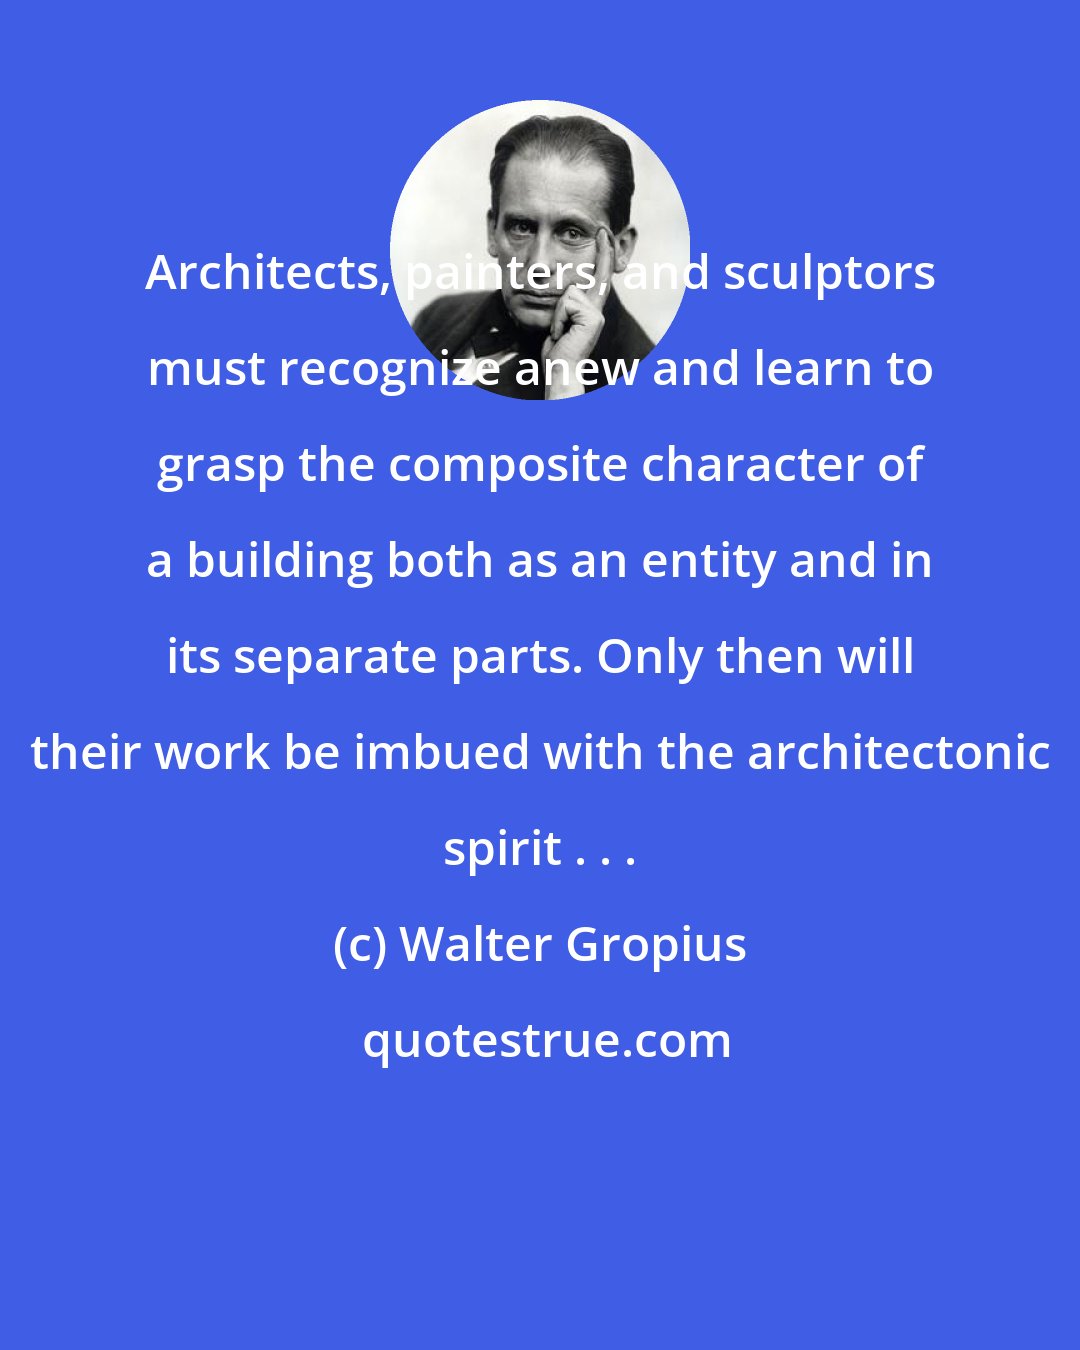 Walter Gropius: Architects, painters, and sculptors must recognize anew and learn to grasp the composite character of a building both as an entity and in its separate parts. Only then will their work be imbued with the architectonic spirit . . .